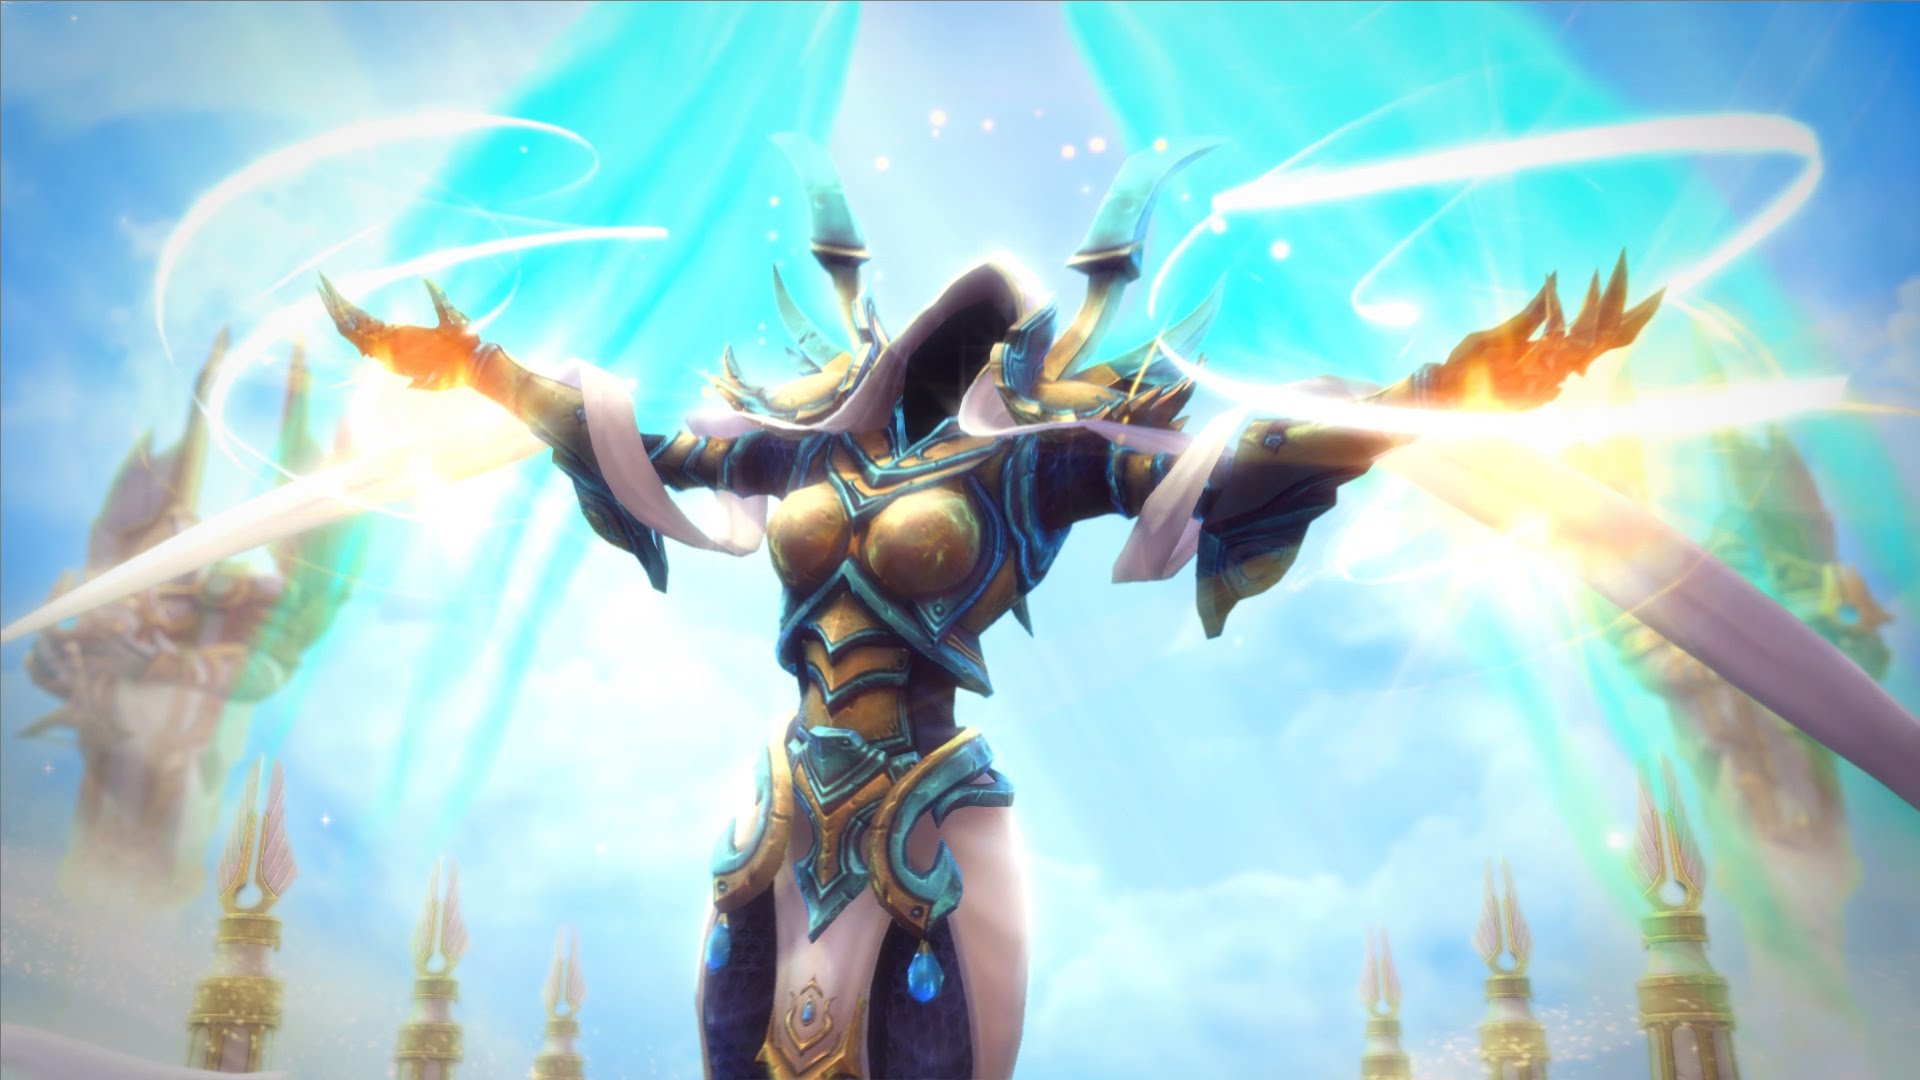 Heroes of the Storm – Auriel Trailer